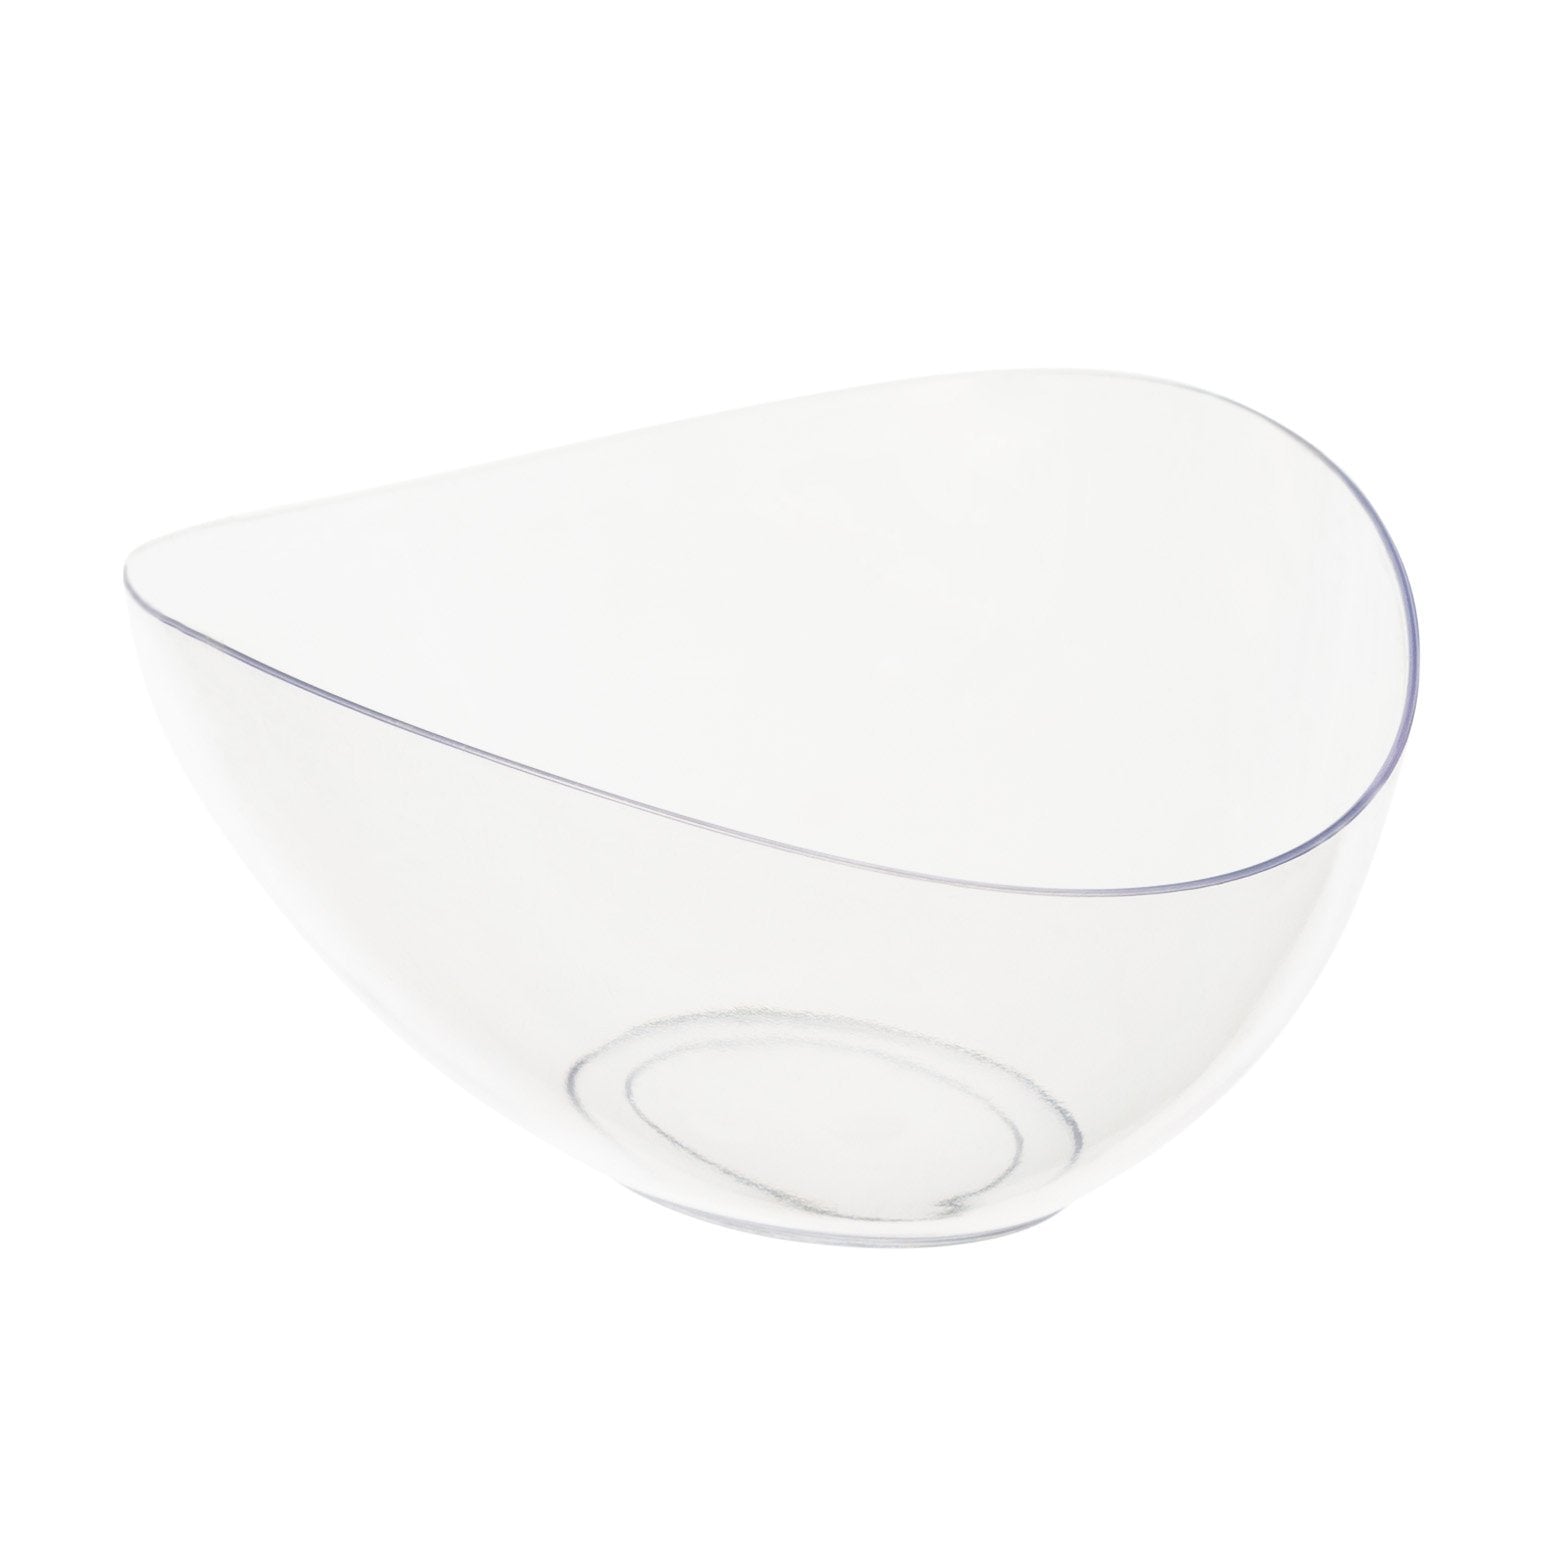 Large Angled Clear Serving Bowl - Premium Heavyweight Plastic